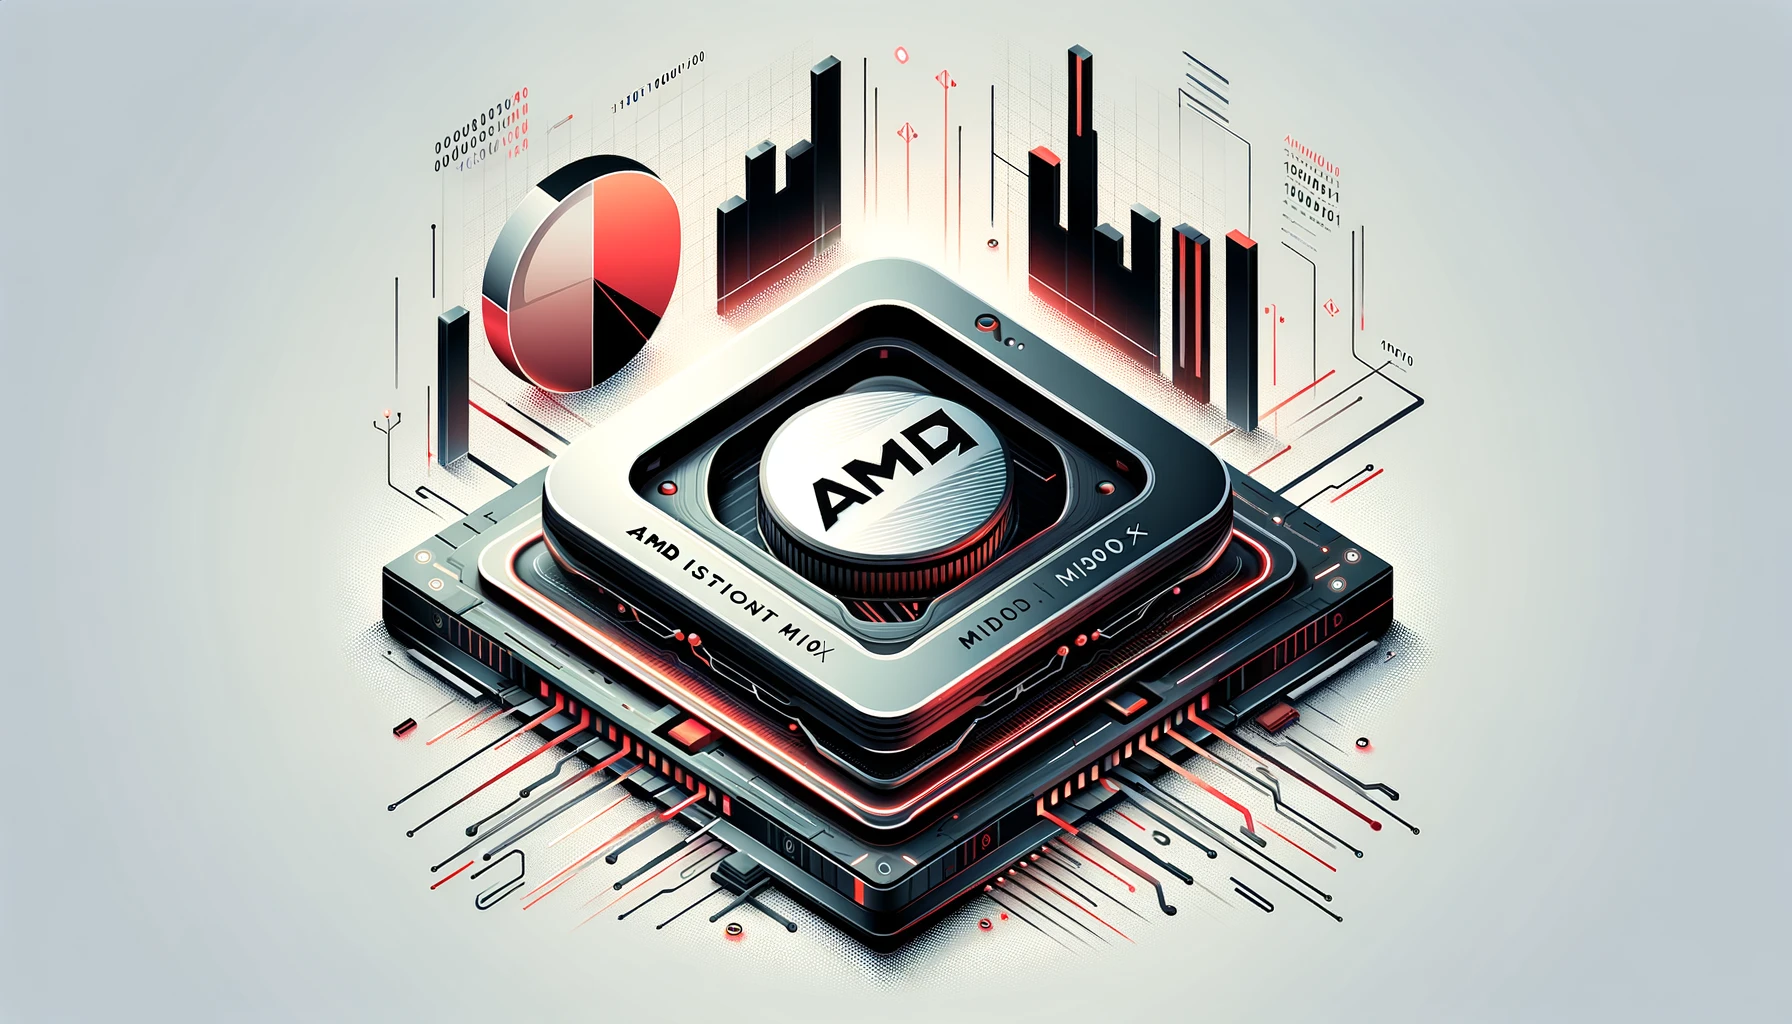 AMD Set to Distribute Large Volumes of Instinct MI300X Accelerators, Securing 7% Share in the AI Market